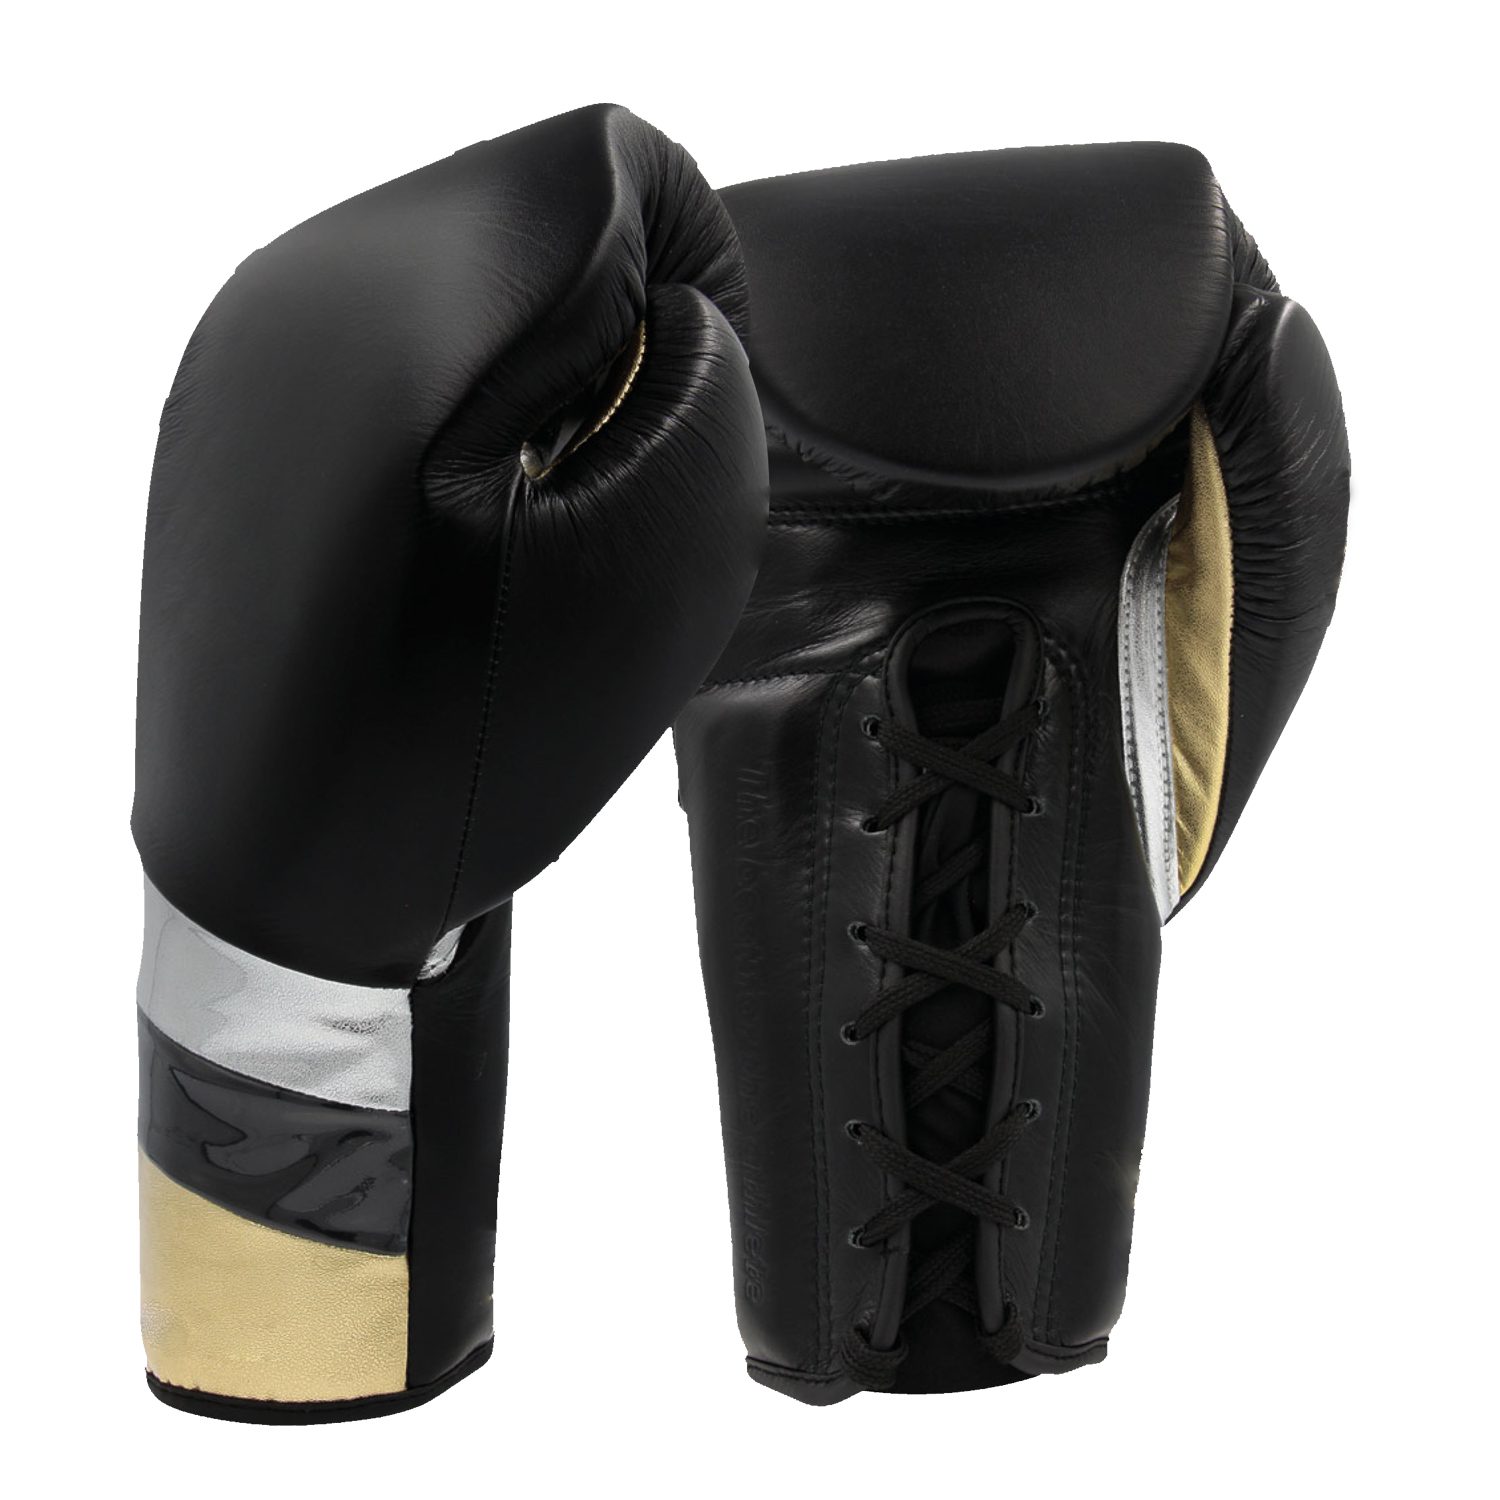 Black custom made leather boxing gloves with embroidered white.